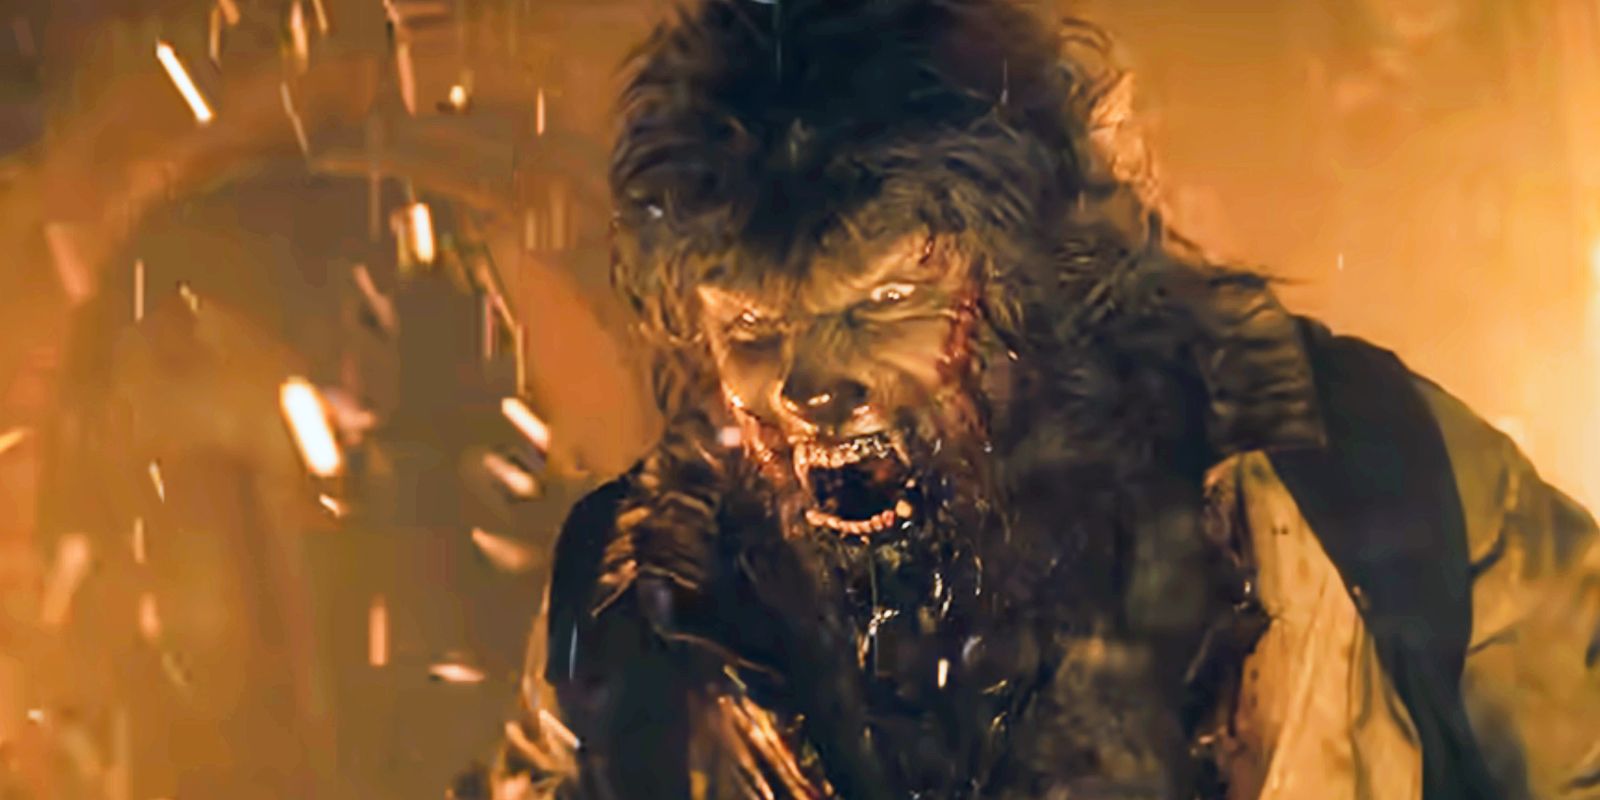 The Wolfman snarling amongst flames in Joe Johnston's The Wolfman